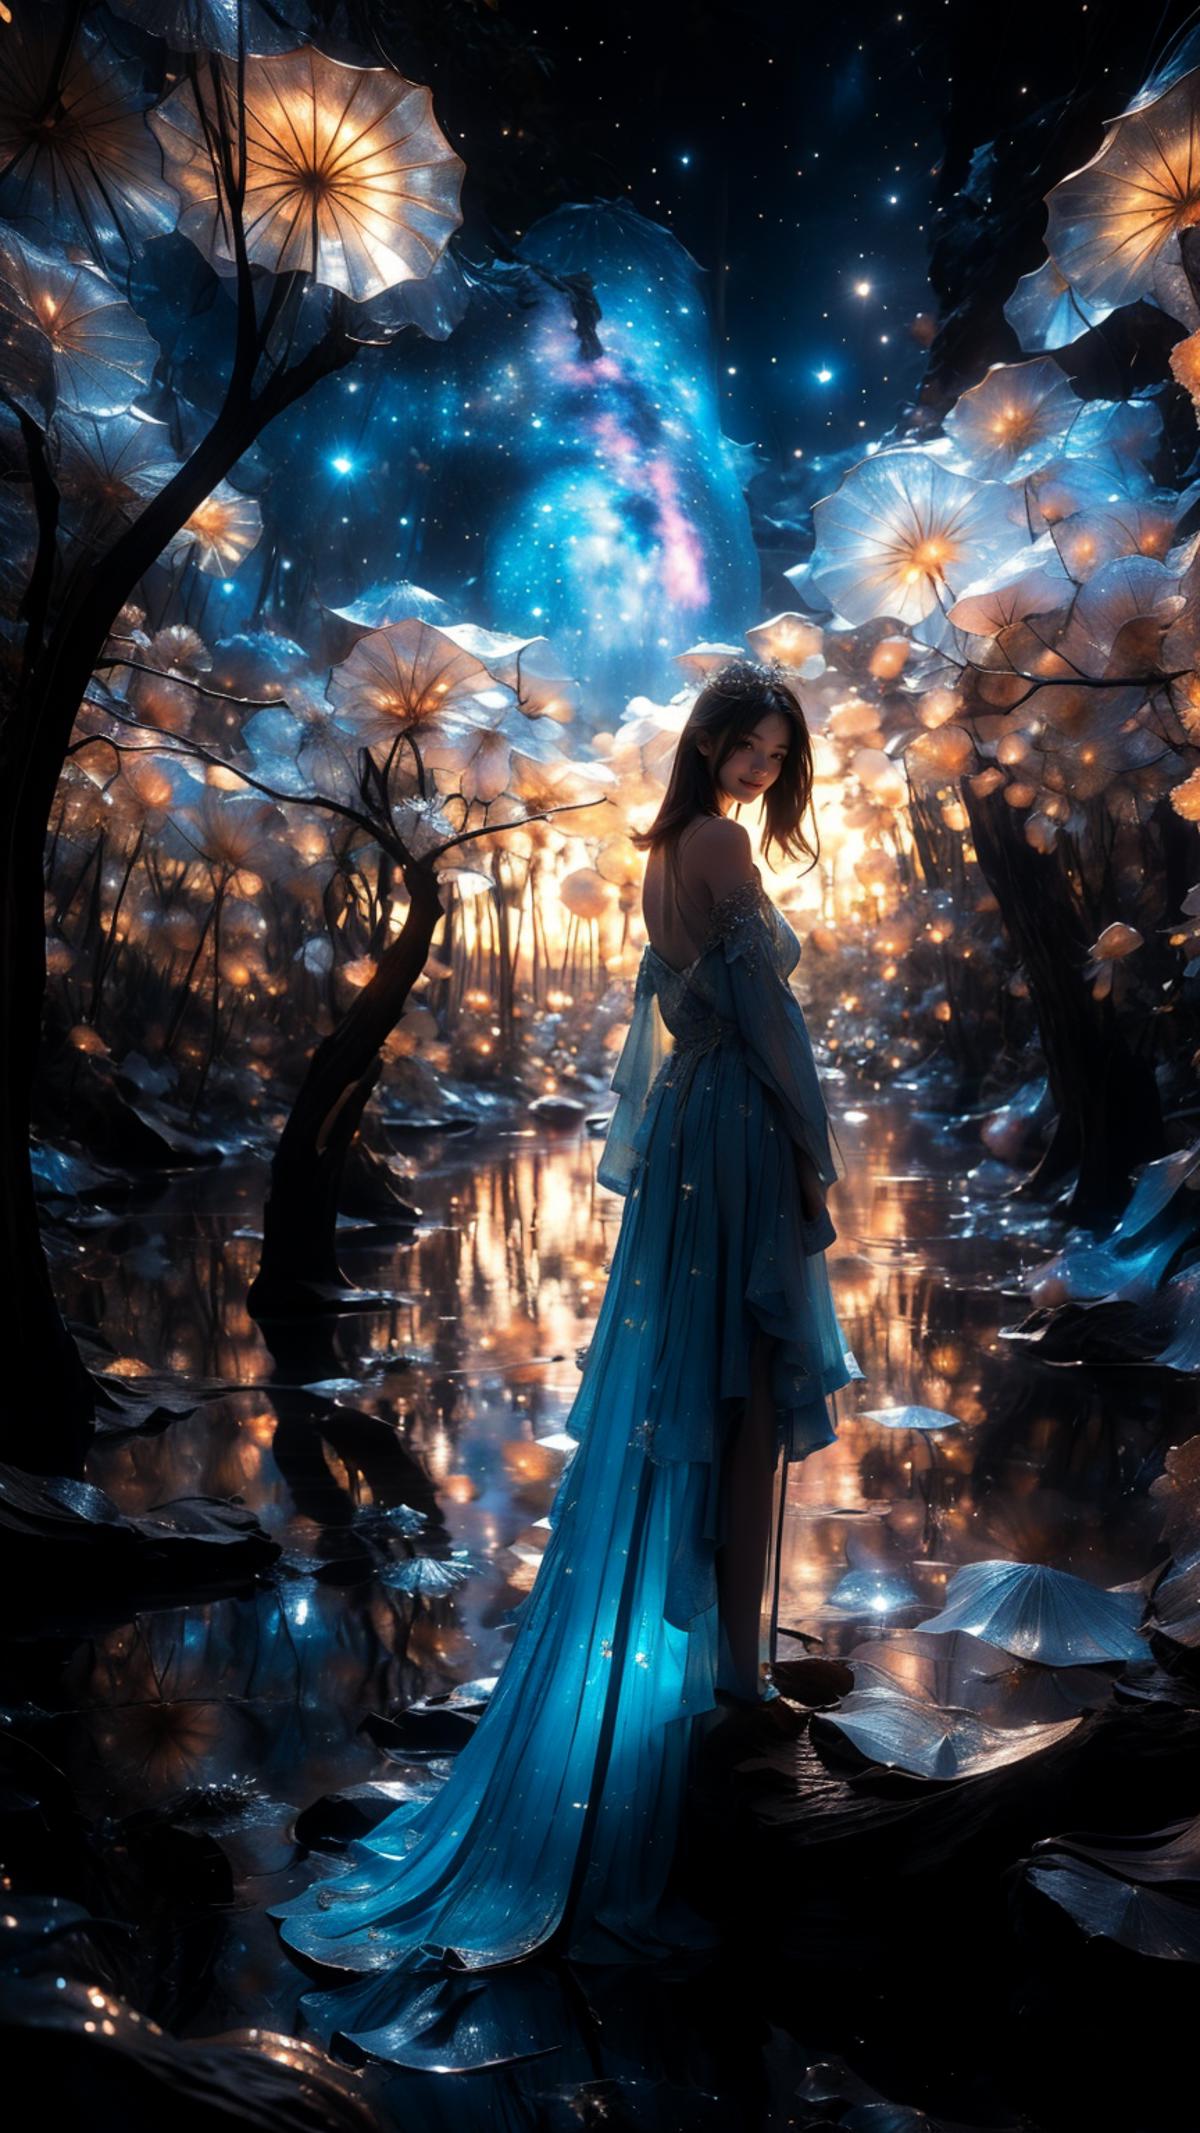 A woman in a blue dress stands in a forest with flowers and stars.